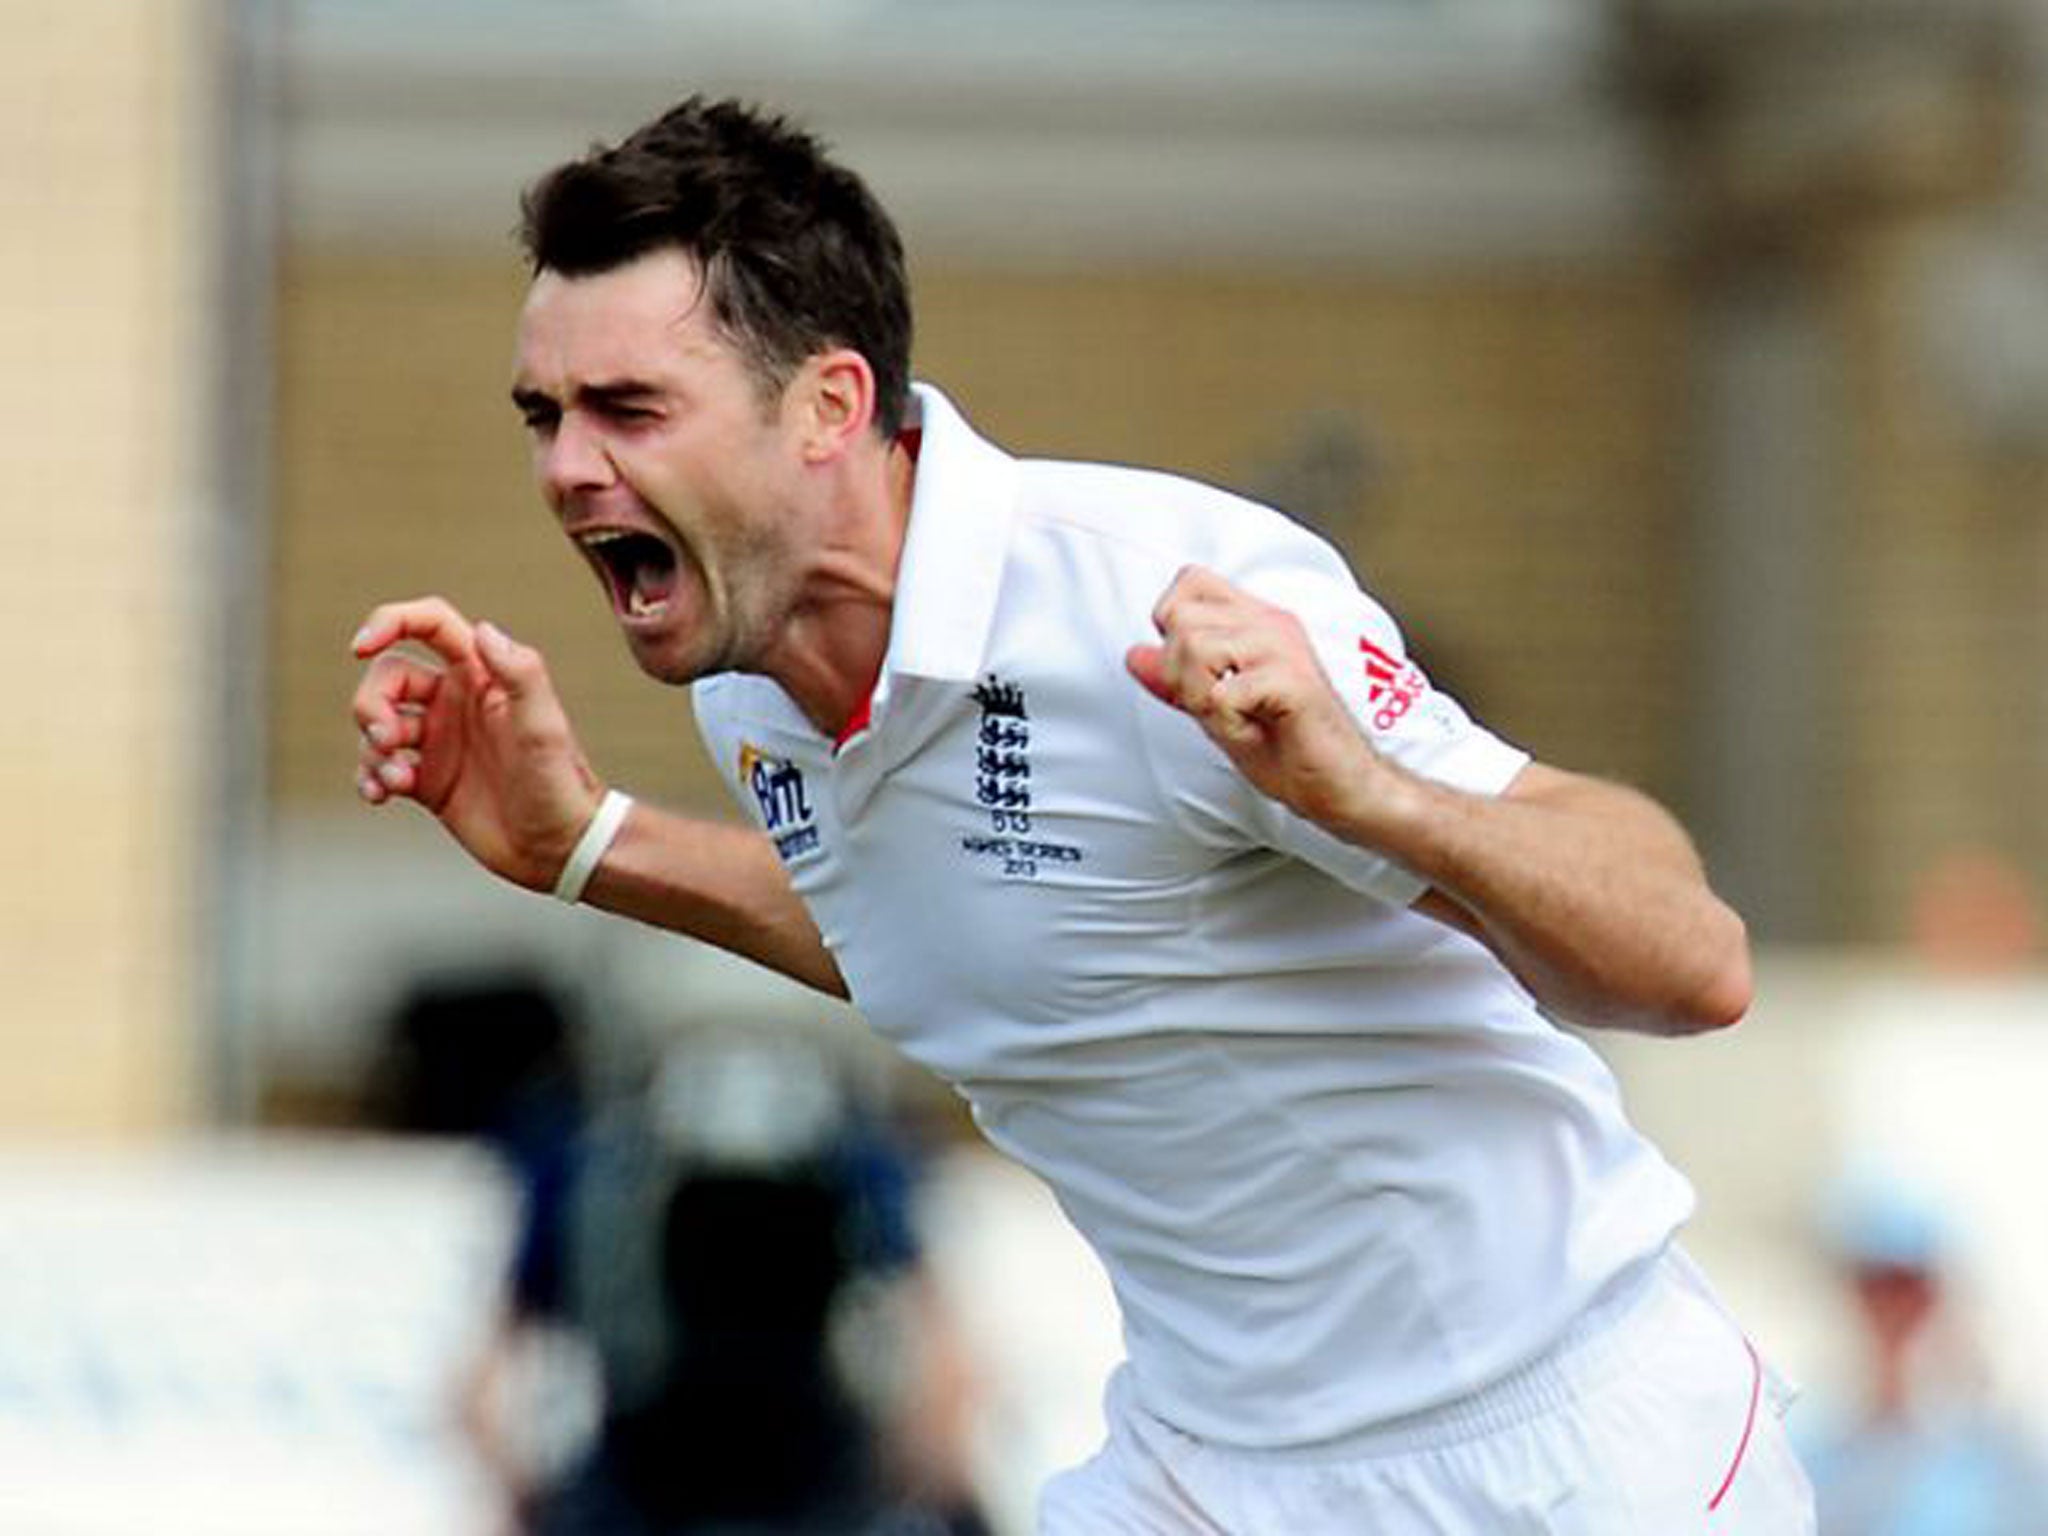 Jimmy Anderson celebrates after taking the wicket of Ashton Agar at Trent Bridge